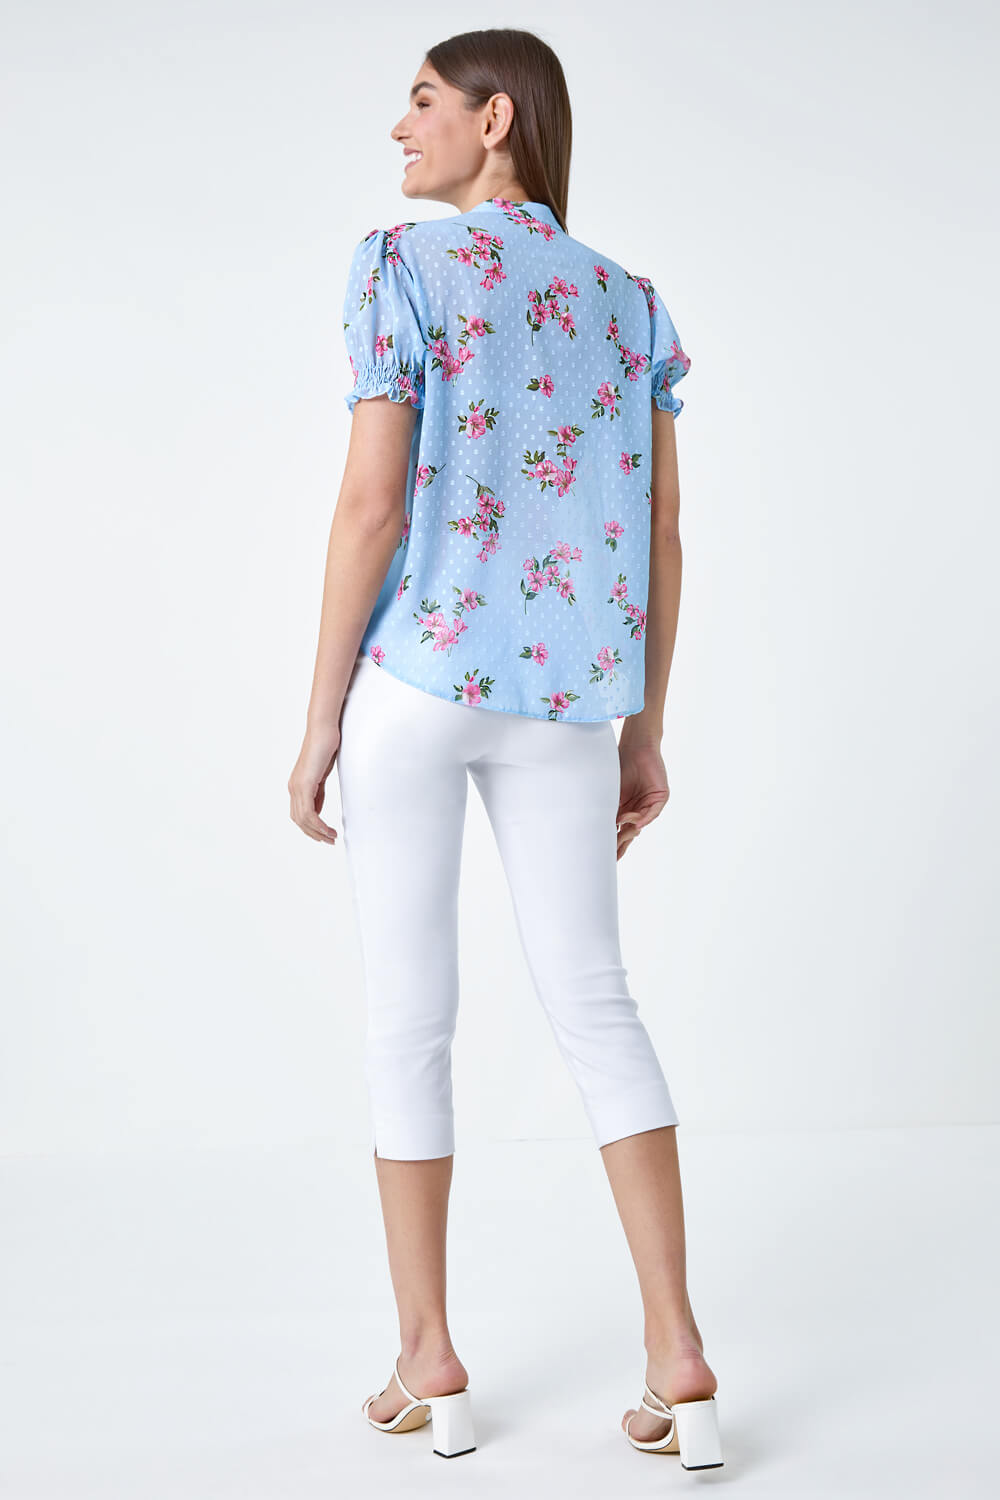 Blue Textured Spot Floral Print Frill Top, Image 3 of 5